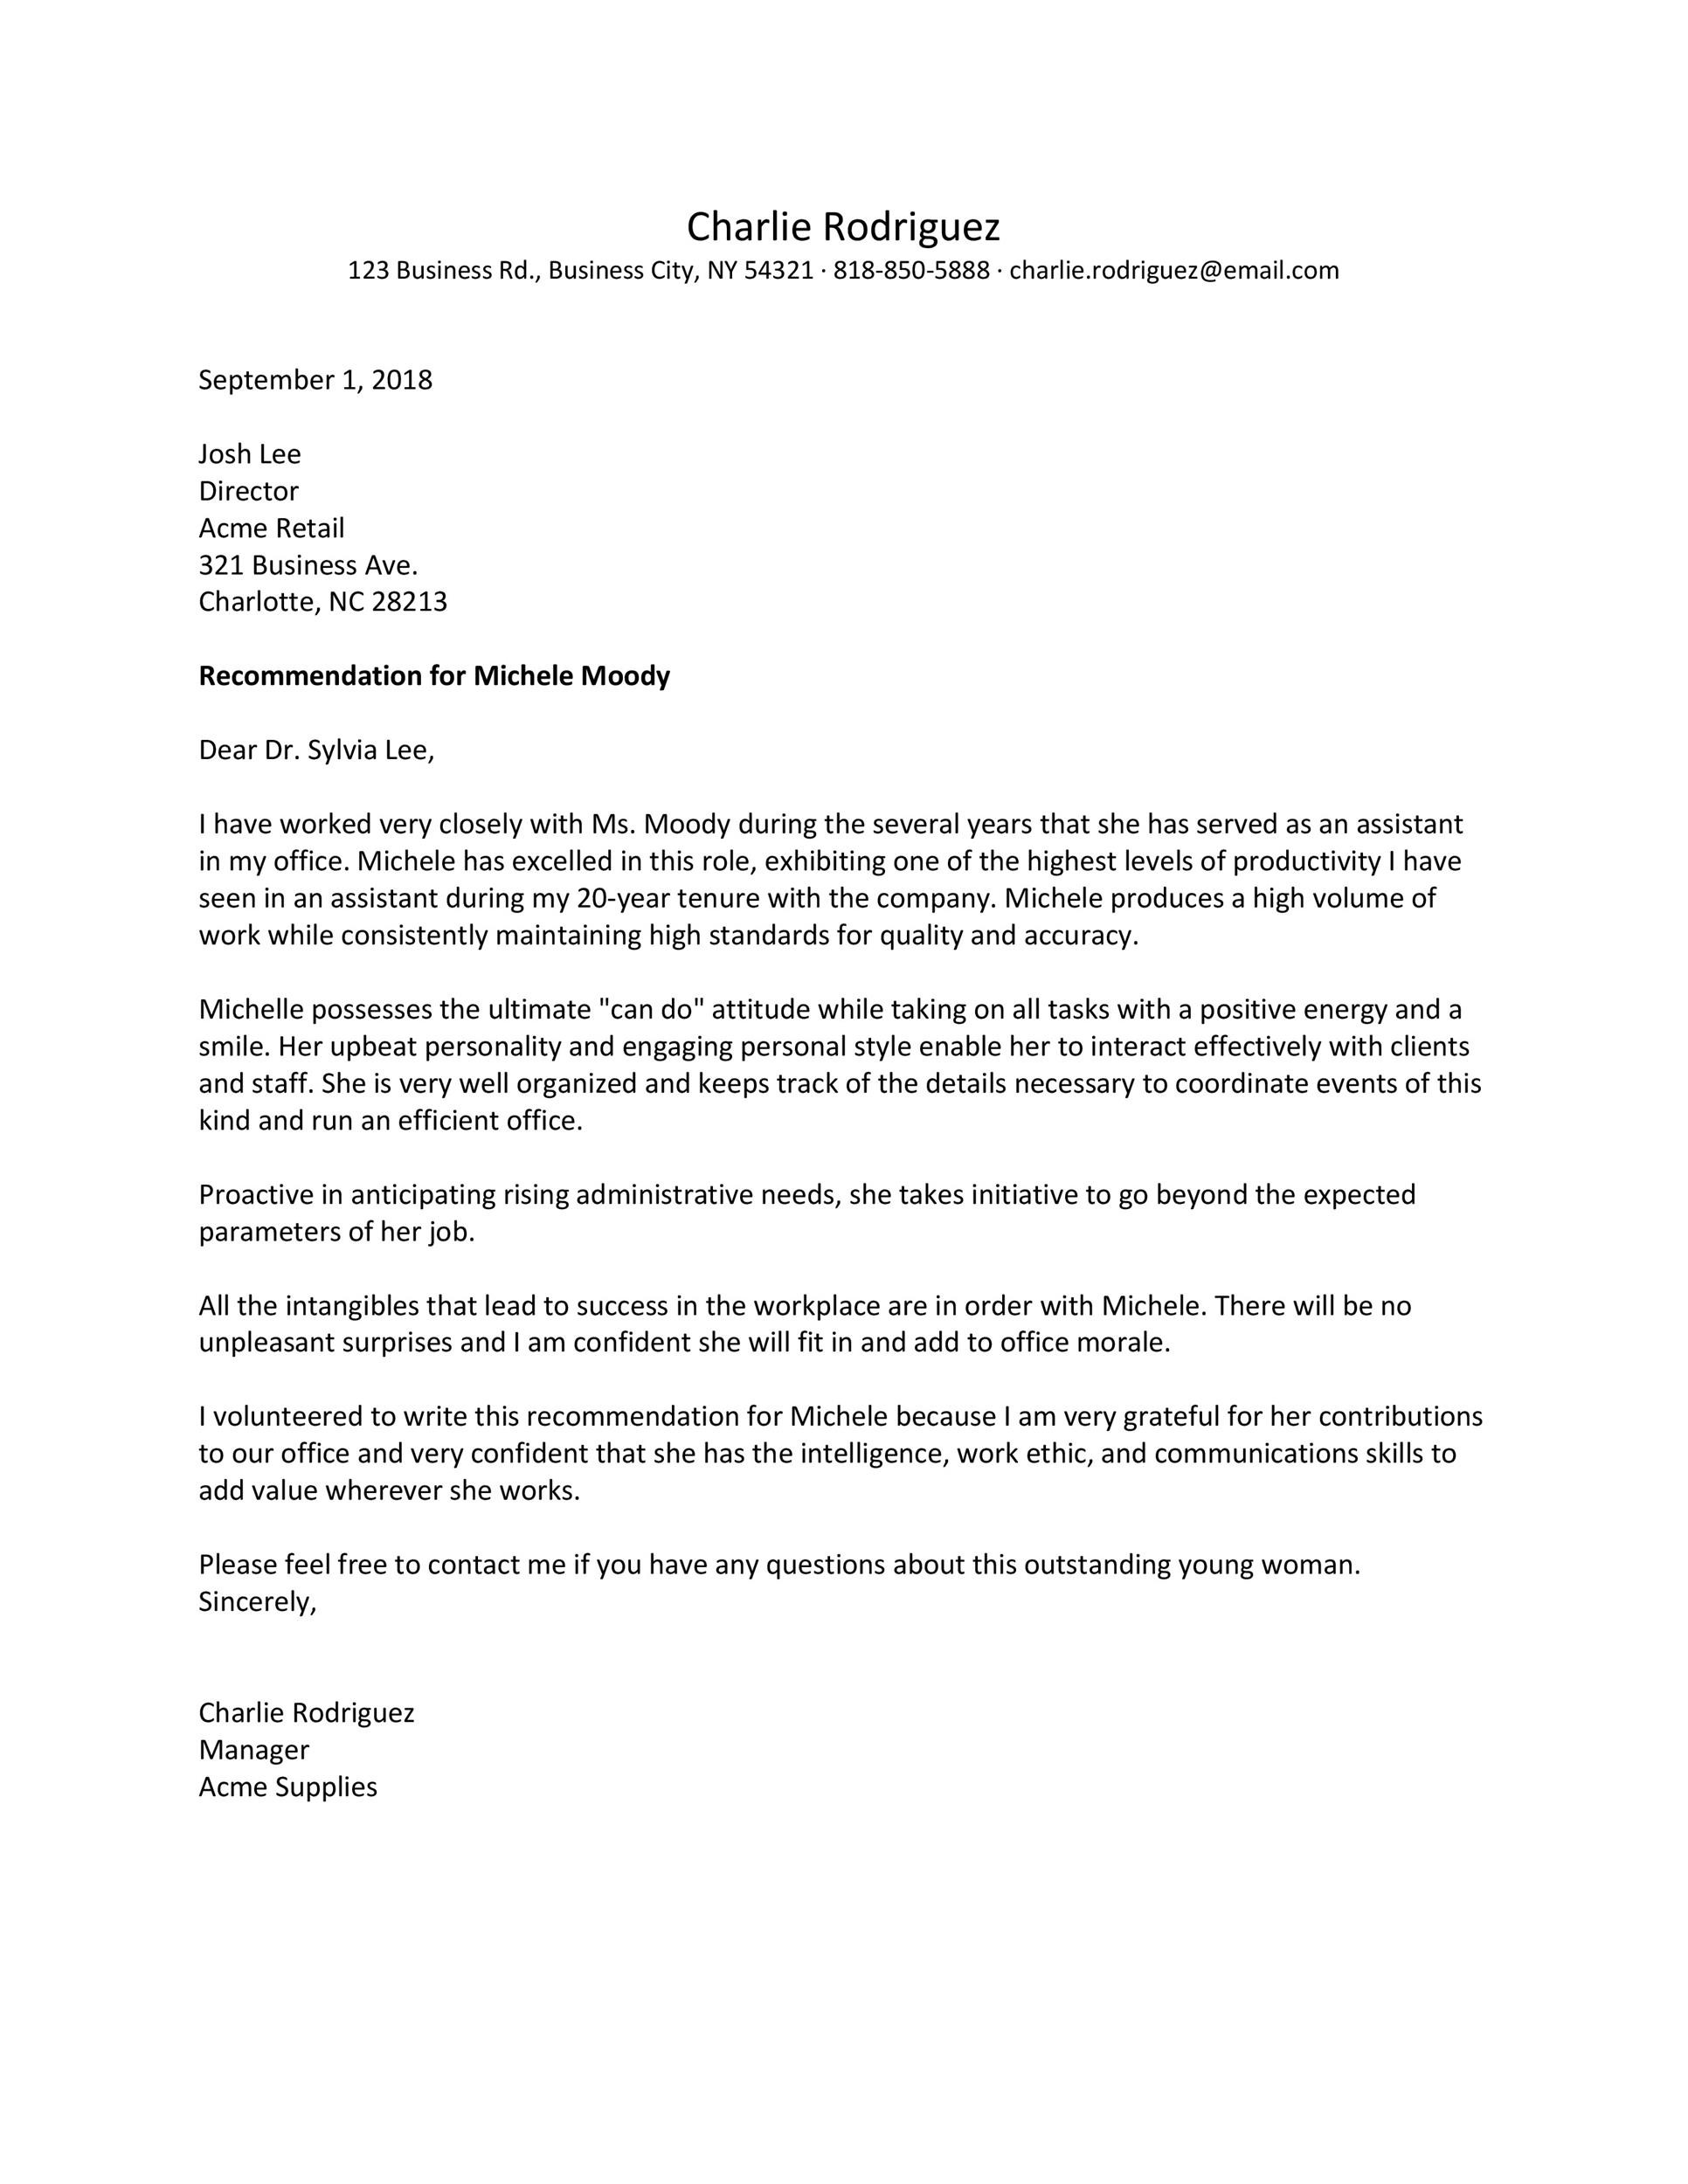 Recommendation Letter For A Job from templatelab.com